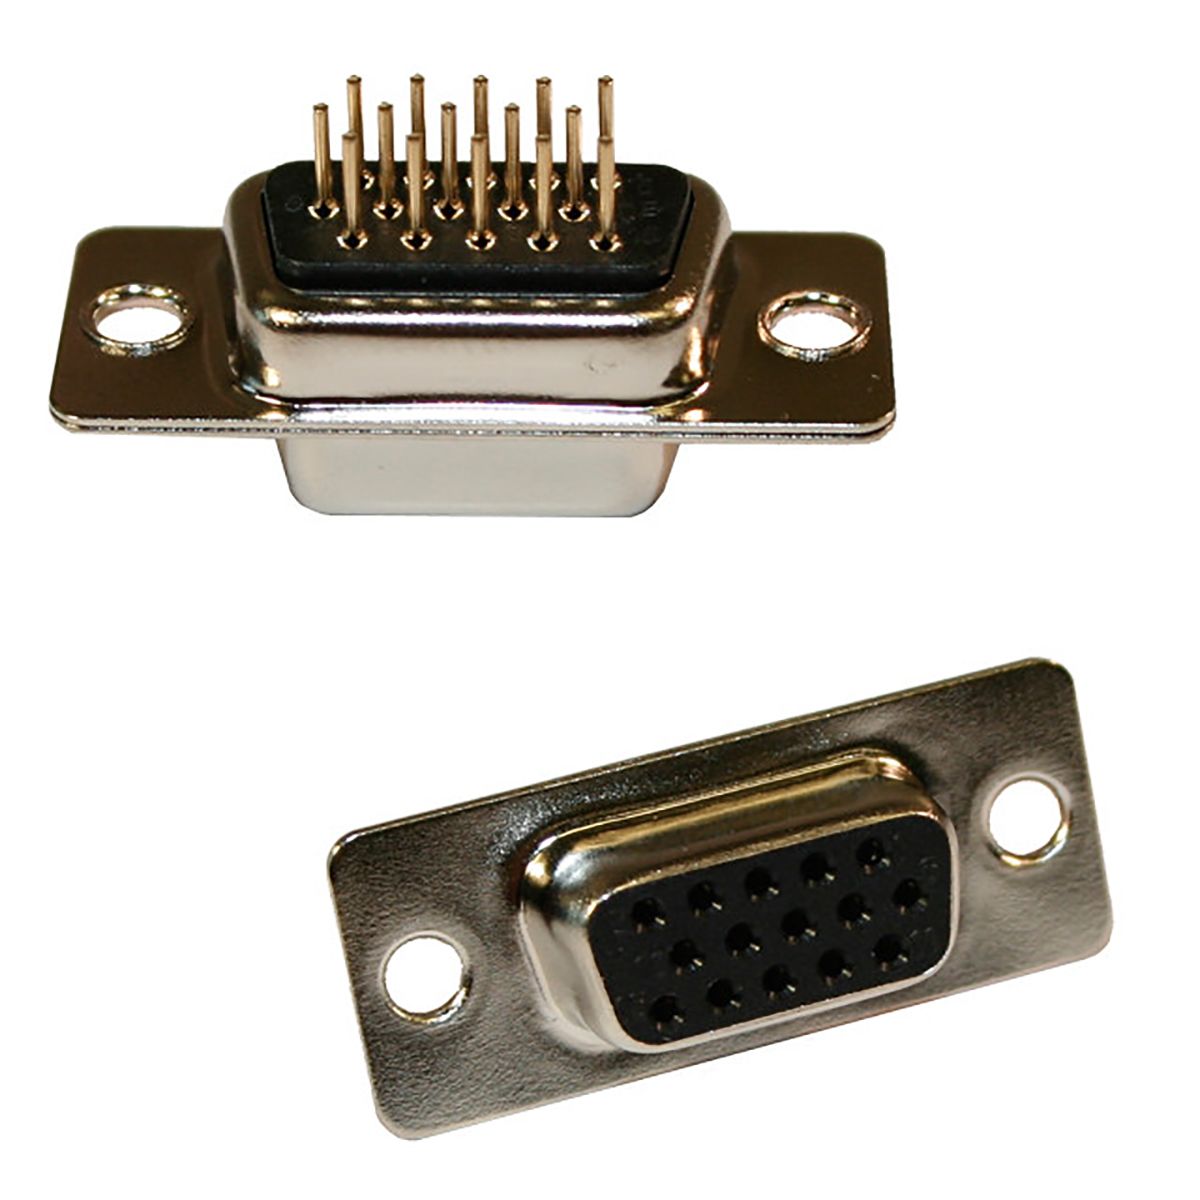 Norcomp 44 Way Through Hole D-sub Connector Socket, 2.29mm Pitch, with 4-40 Spacer/Board Lock